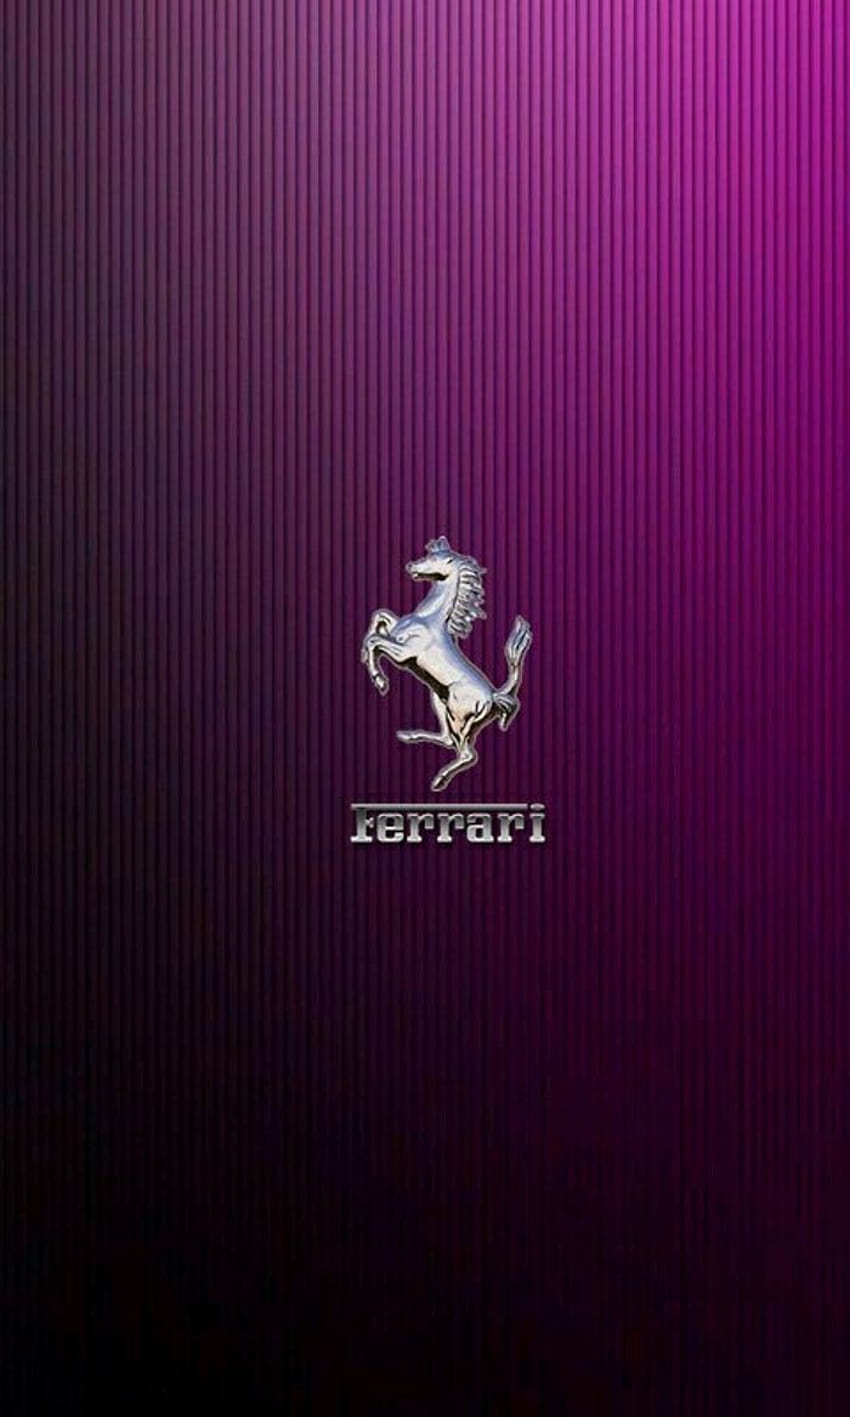 This is a Ferrari logo with an unusual purple. I've never seen this colour on any of their cars HD phone wallpaper